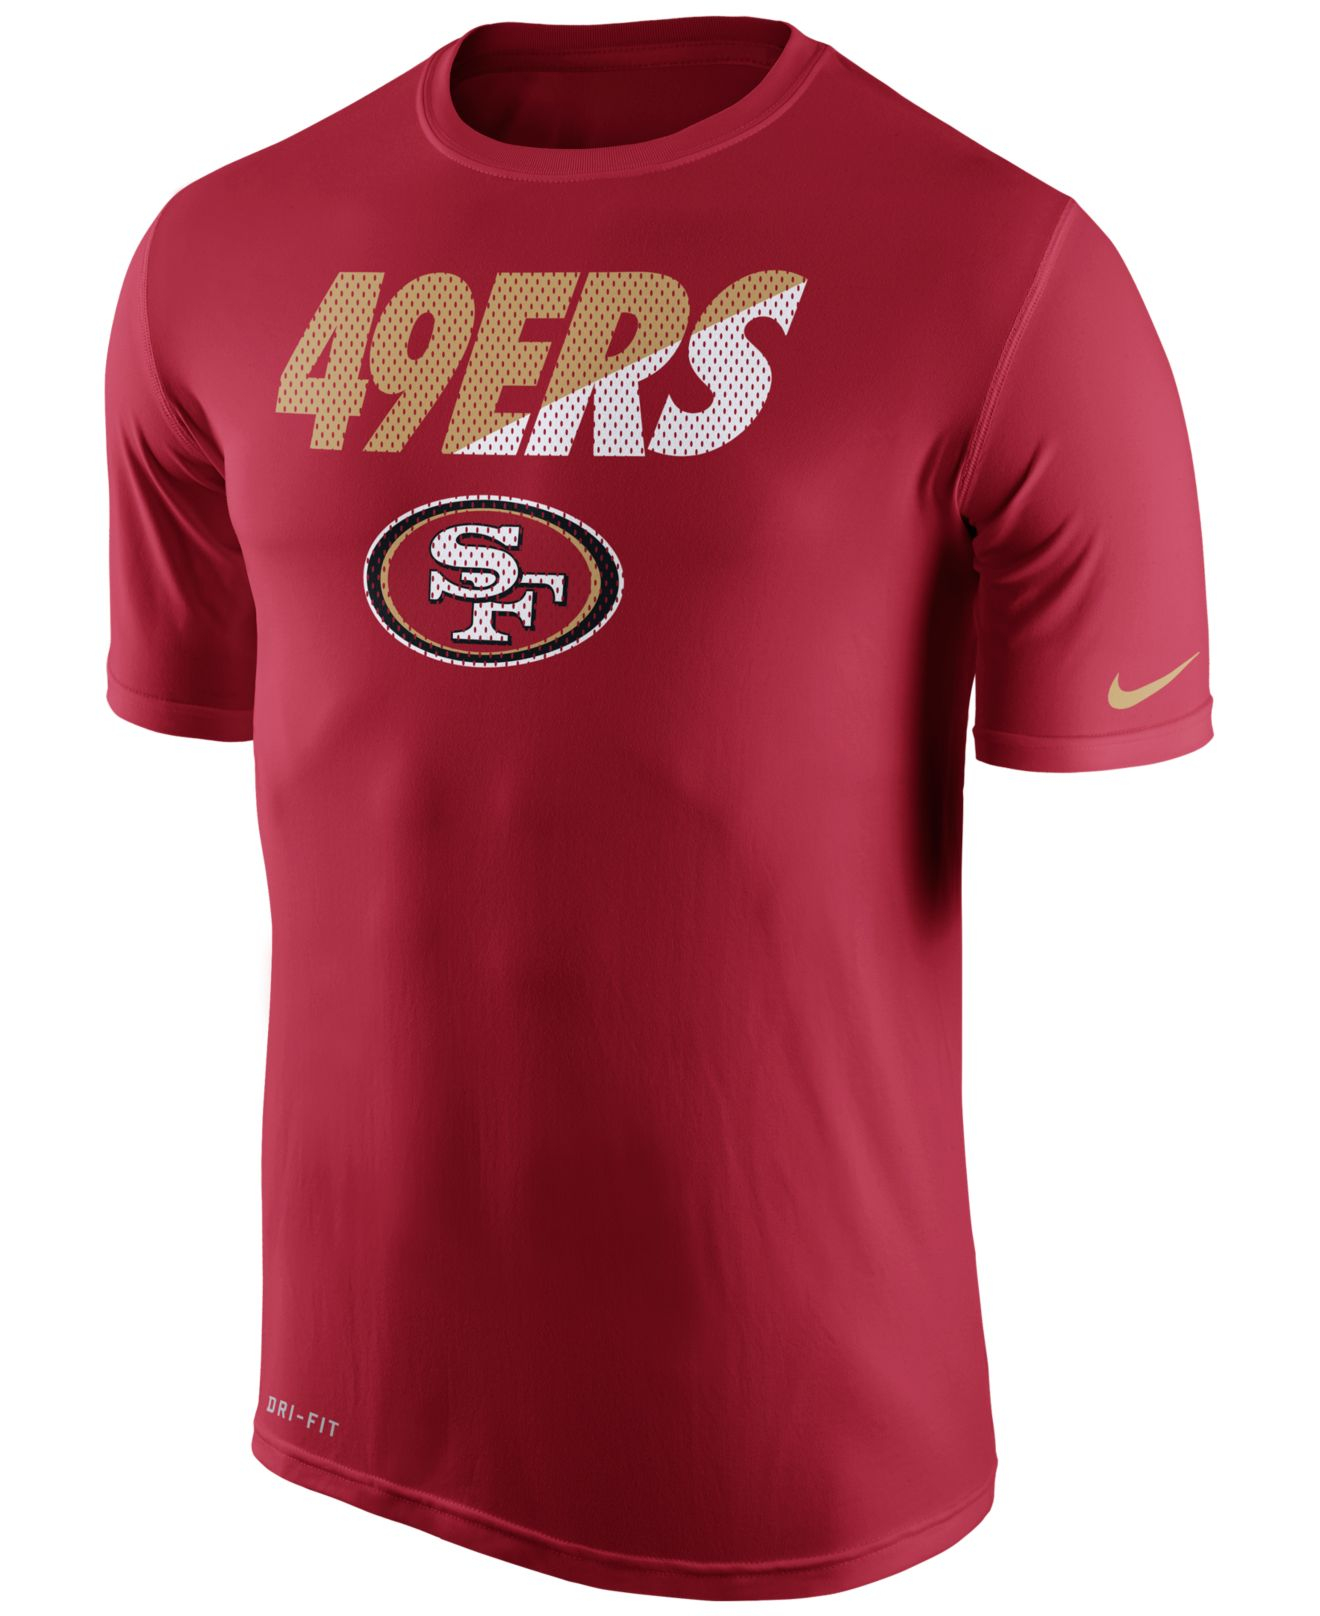 Lyst - Nike Men's San Francisco 49ers Dri-fit Practice T-shirt in Red ...